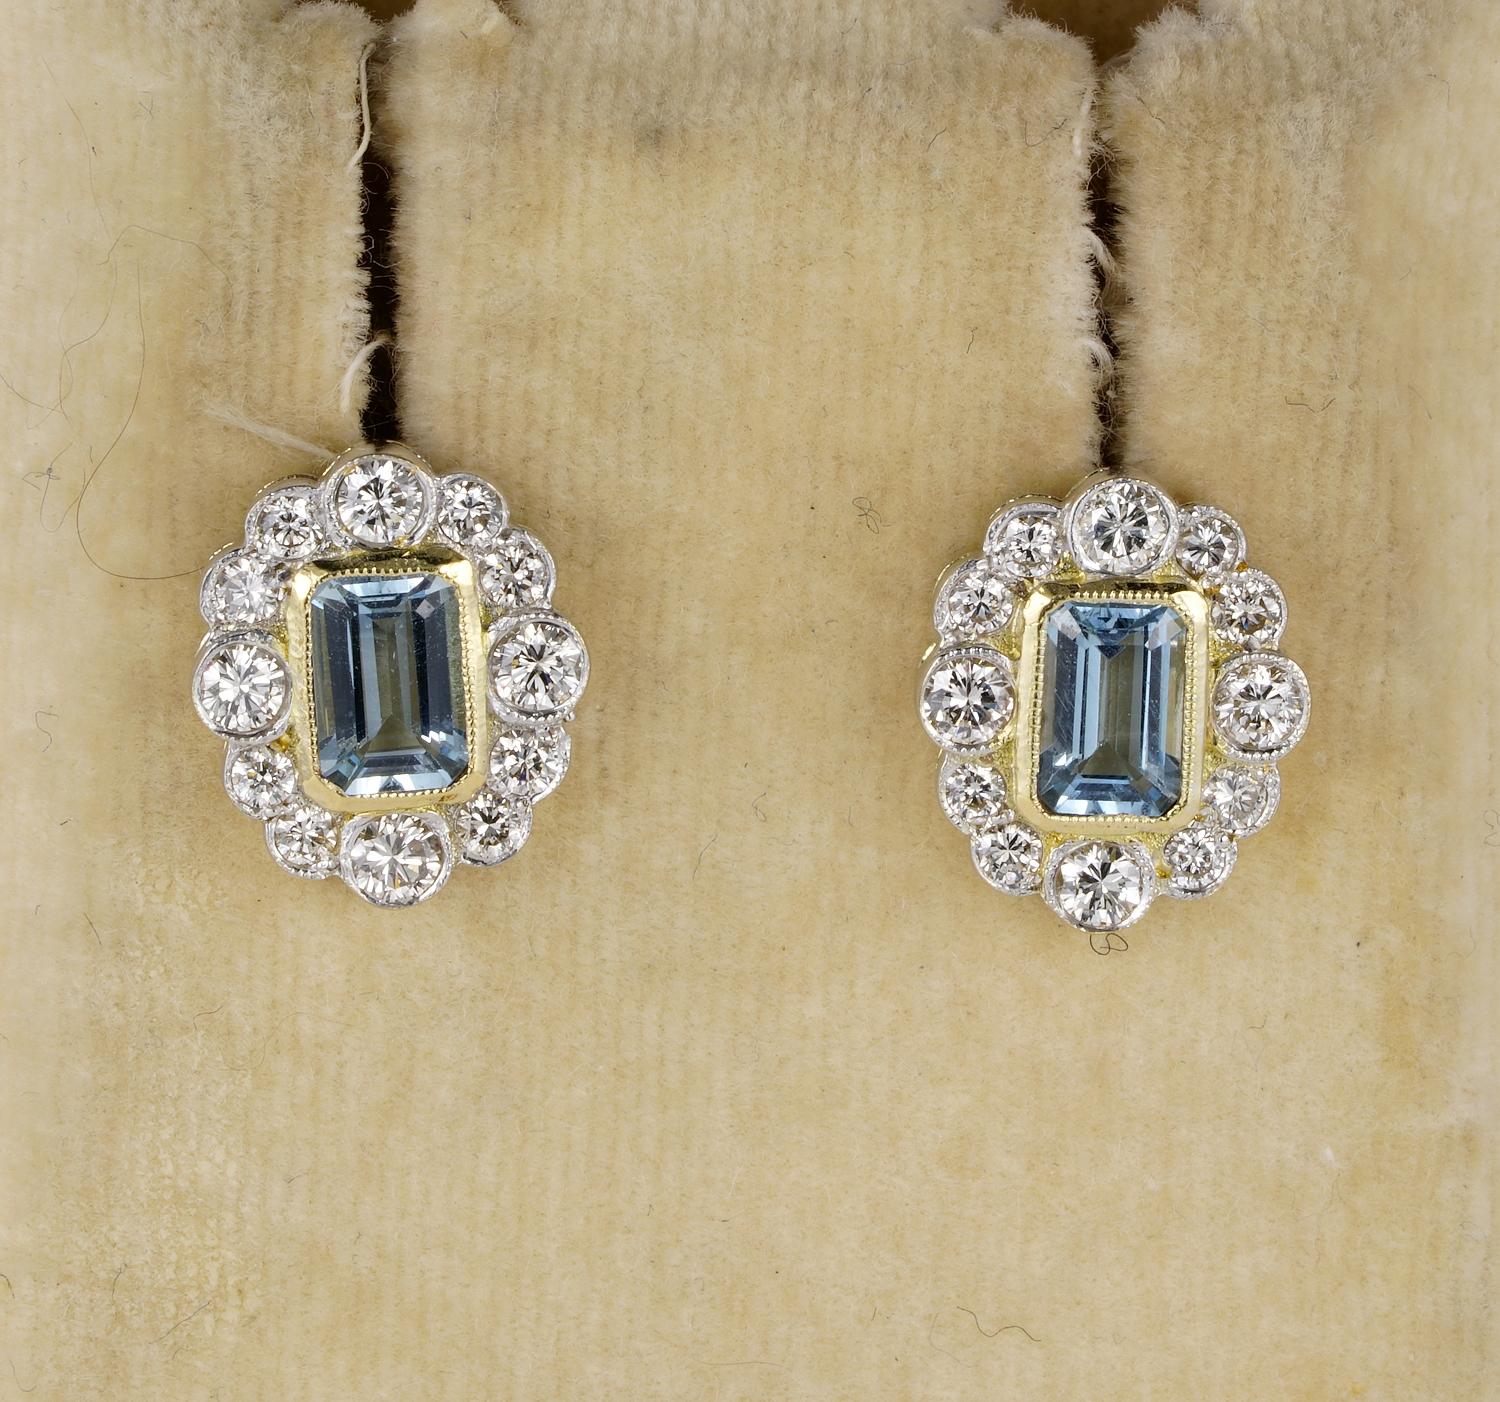 Elegance at Peak

A touch of timeless Deco style with this spectacular pair of late Art Deco inspired Vintage earrings 1960 ca
Superbly hand crafted of solid 18 KT gold and Platinum portions for the Diamond setting
A play of sparkly Diamonds